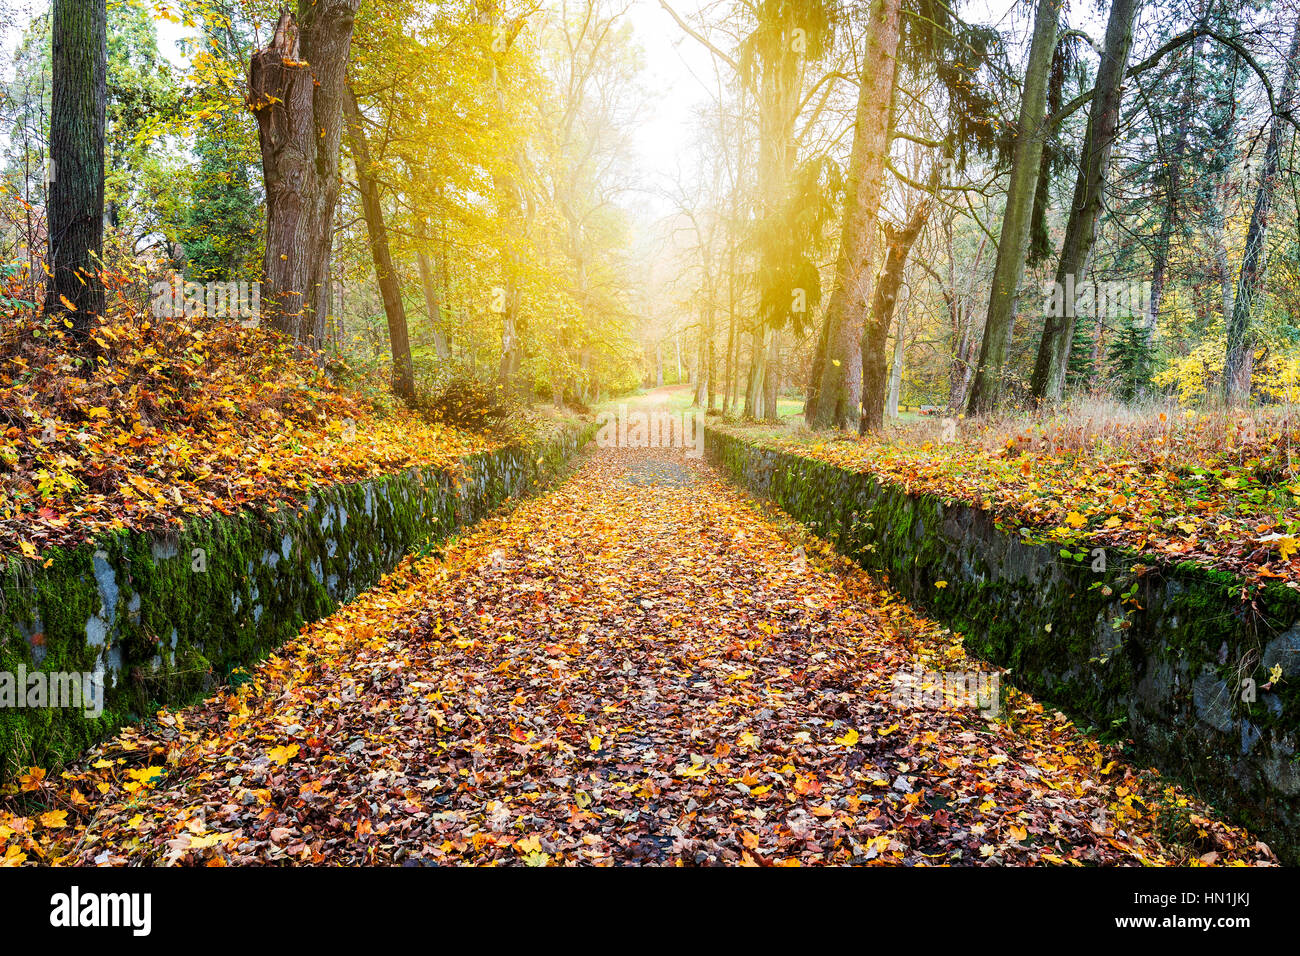 Pathway through the autumn forest with sunbeams Stock Photo